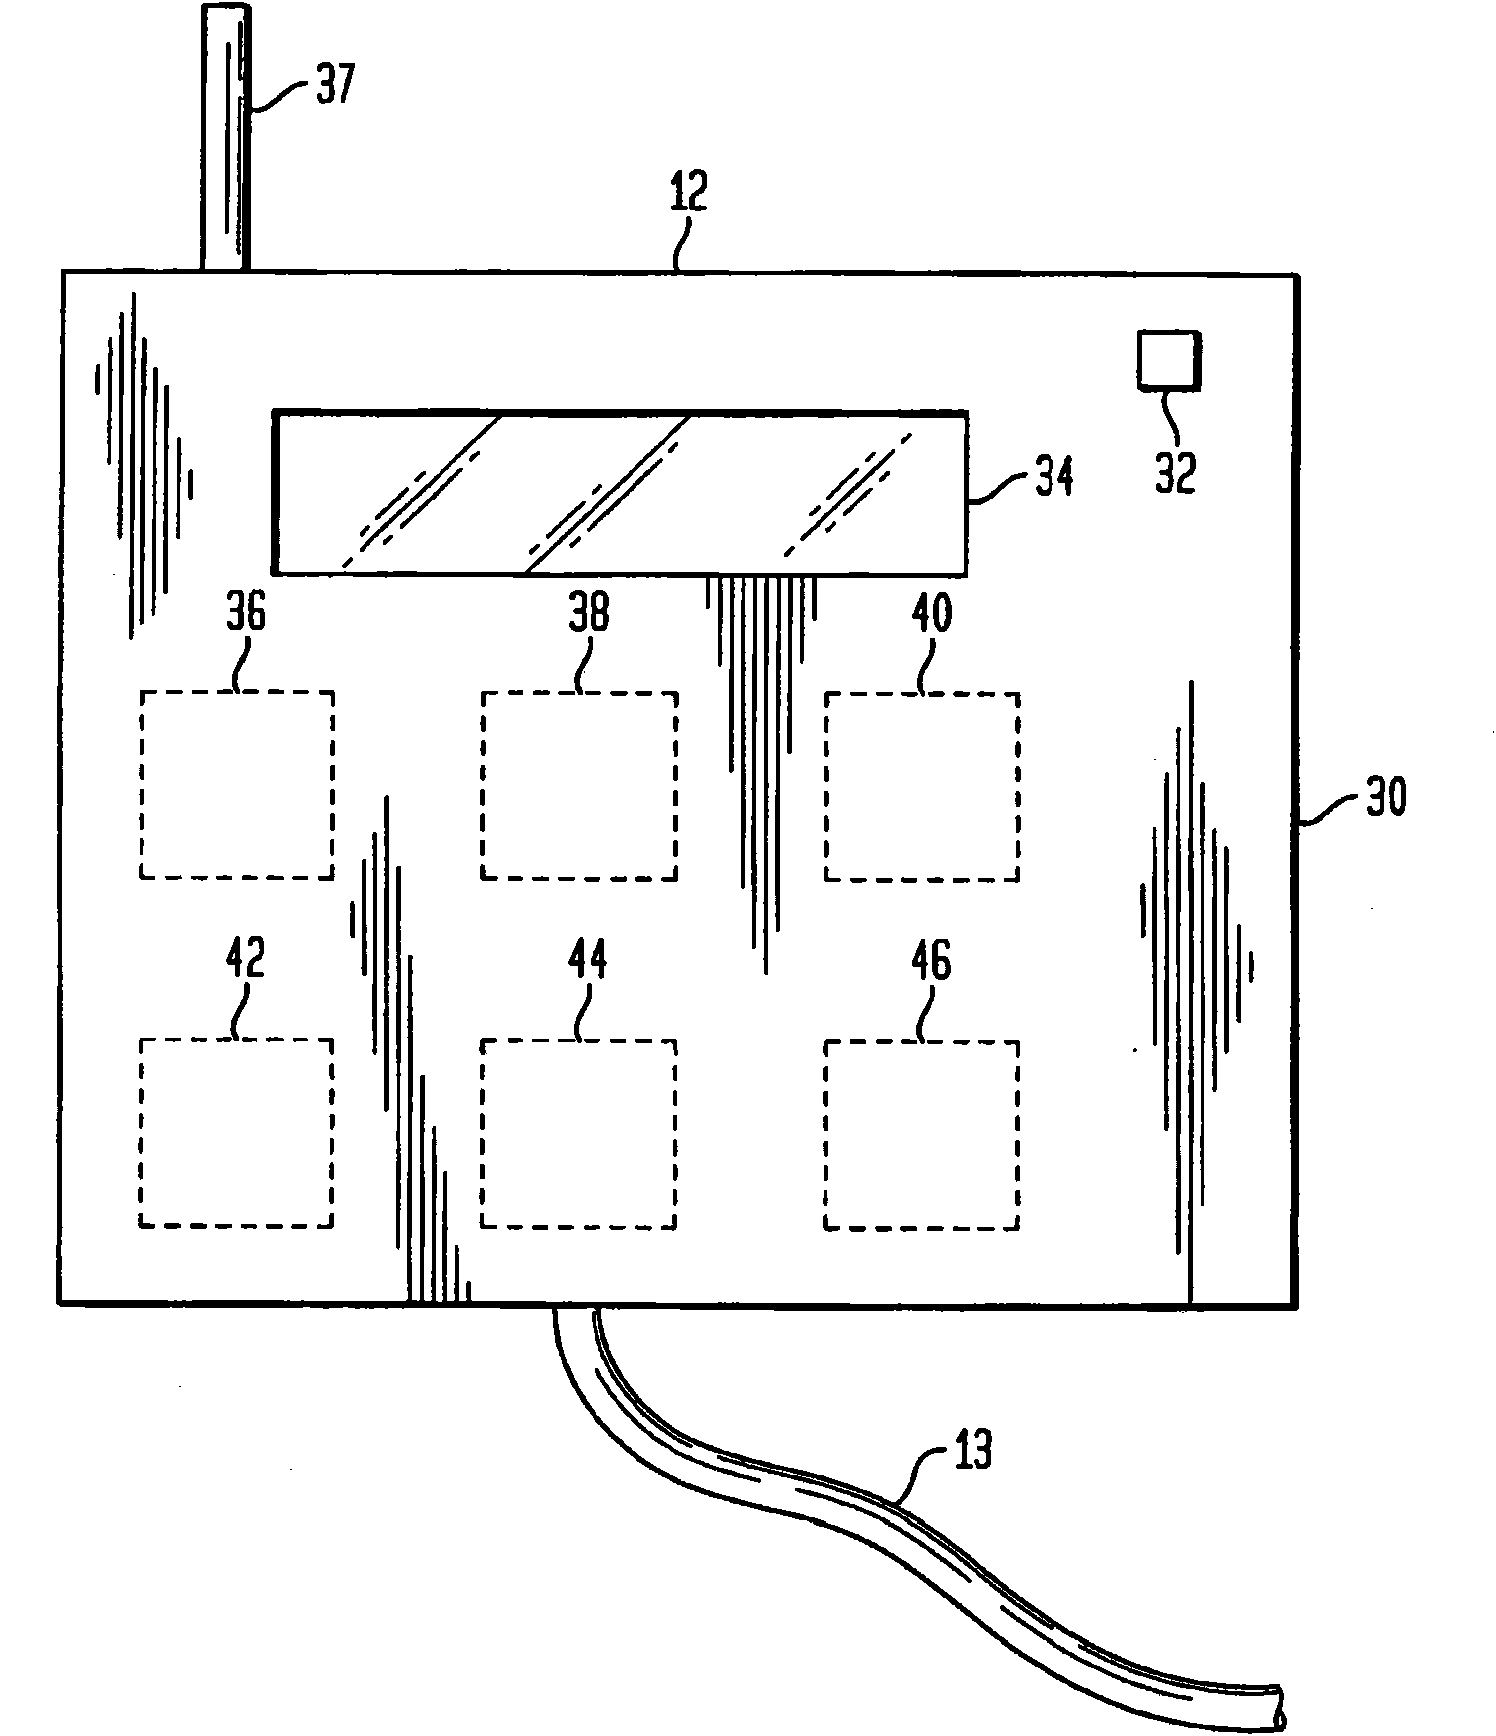 Arc fault root-cause finder system and method